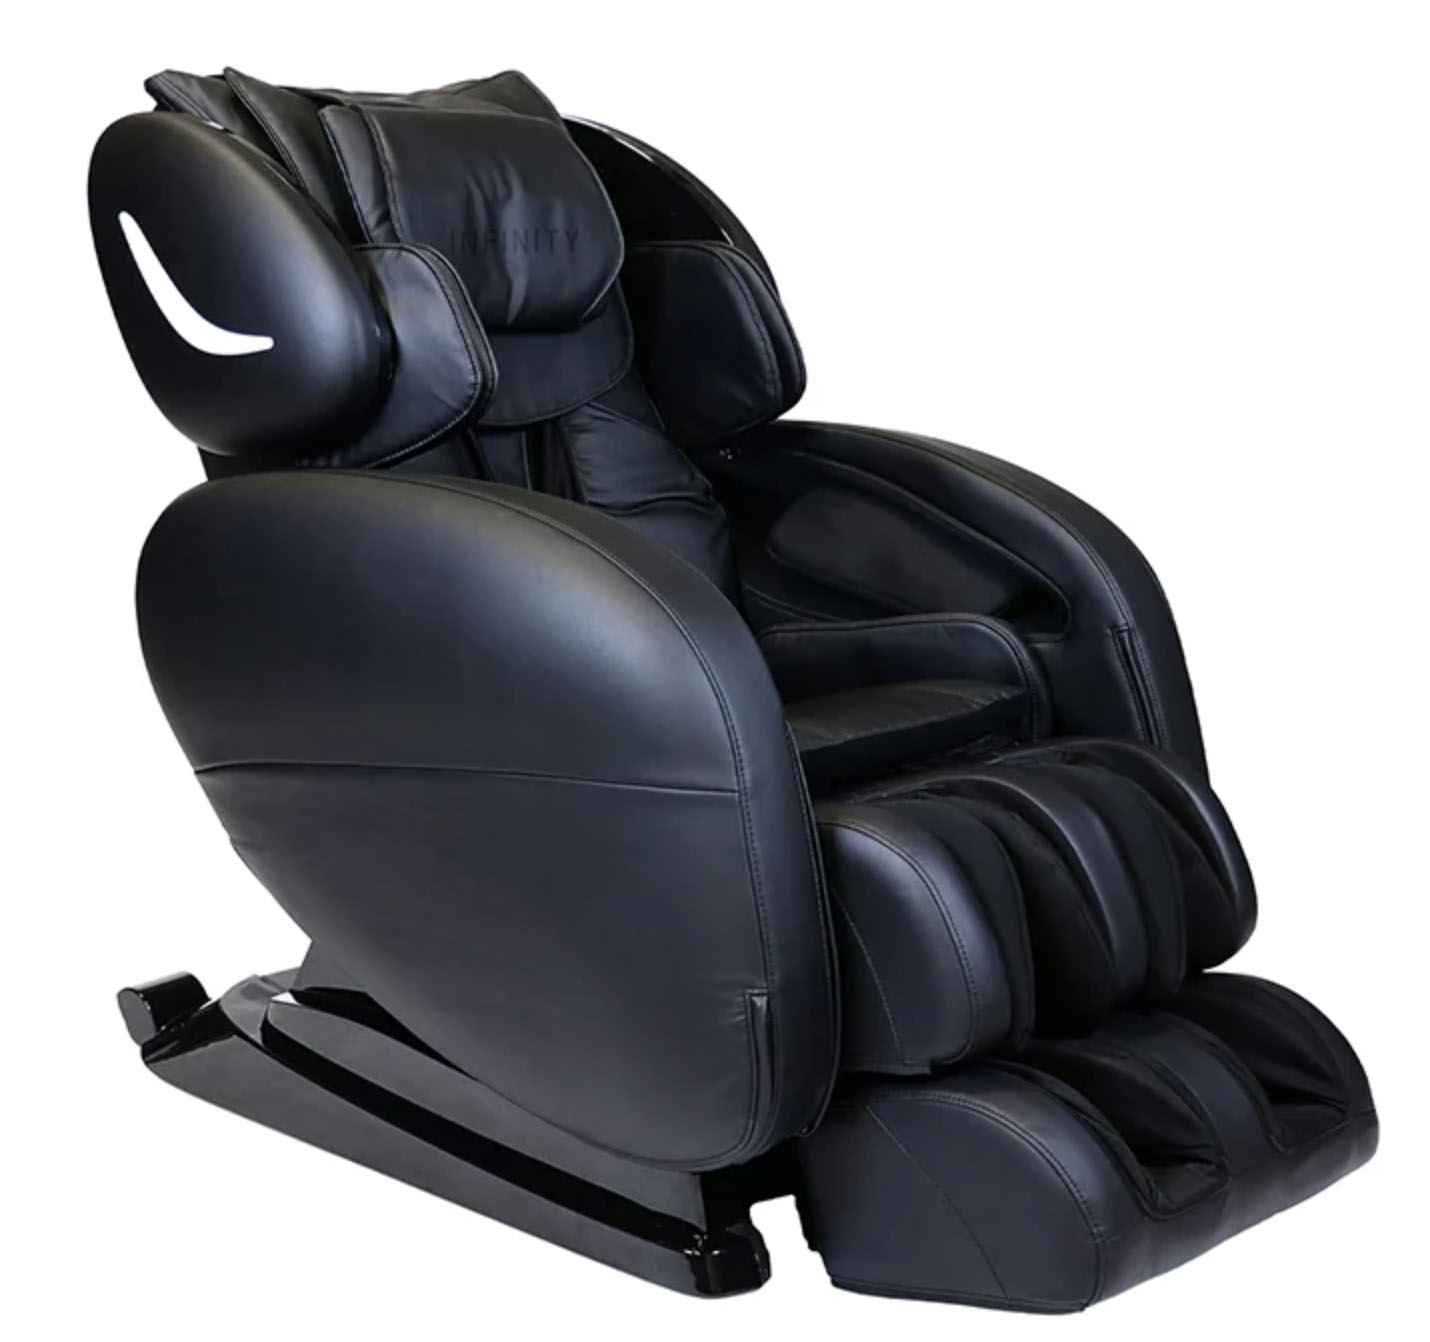 Side view of black massage chair